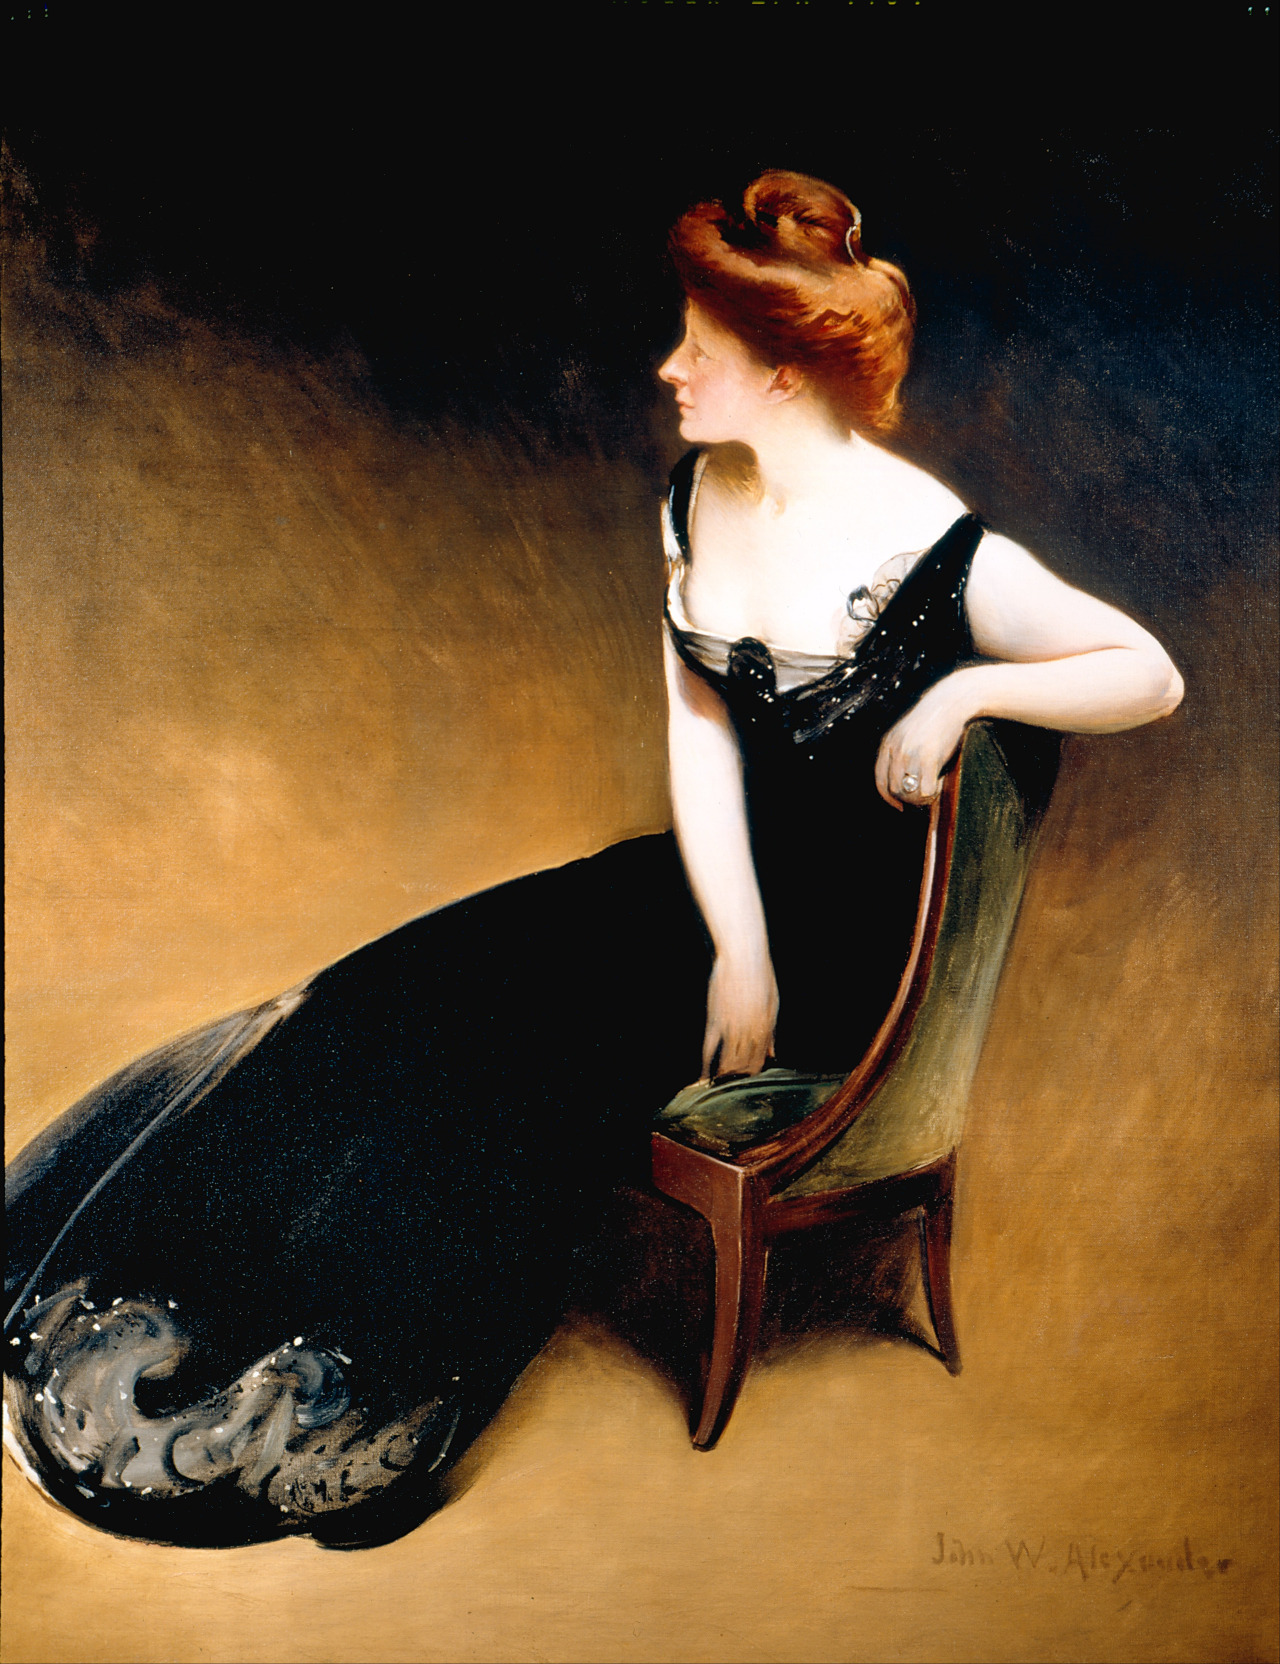 Portrait of Mrs. V, Mrs. Herman Duryea (1898). John White Alexander (American, 1856-1915). Oil on canvas. Philbrook Museum of Art; Alexander was greatly influenced by and a leading exponent of the Art Nouveau style.